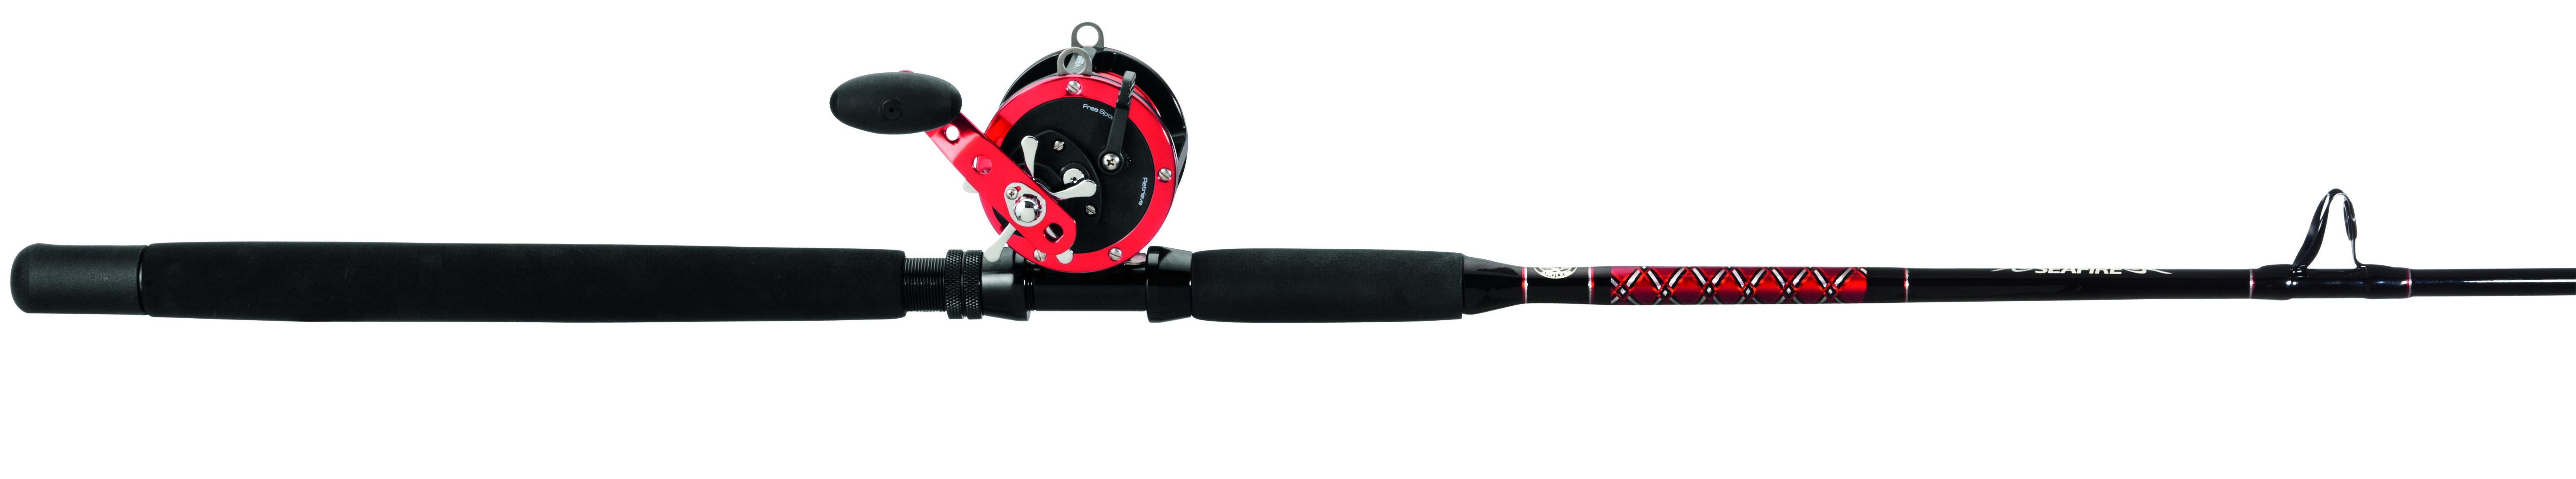 Offshore Angler Seafire Combo, ready to conquer any fish in the